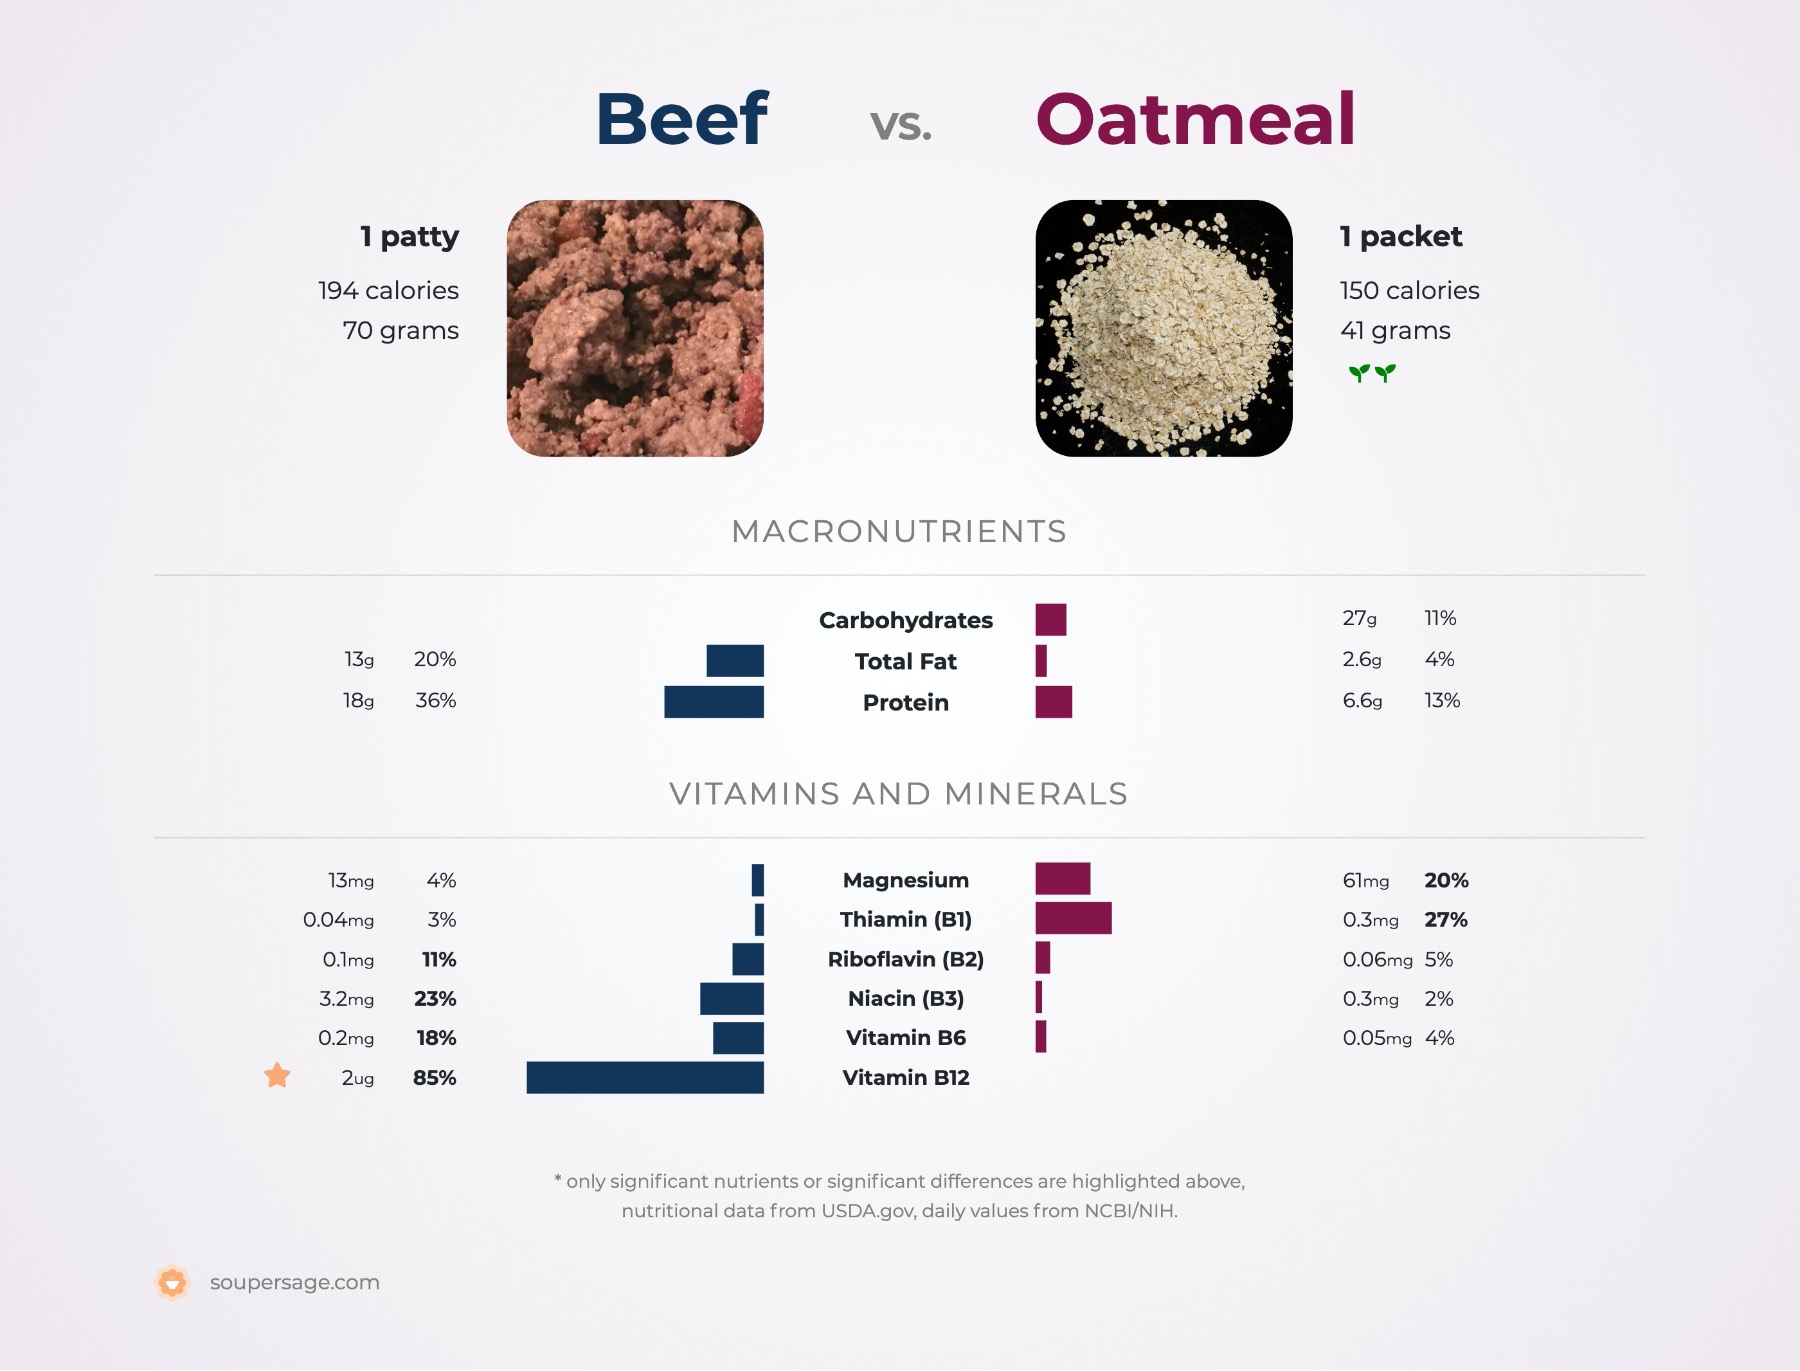 nutrition comparison of beef vs. oatmeal